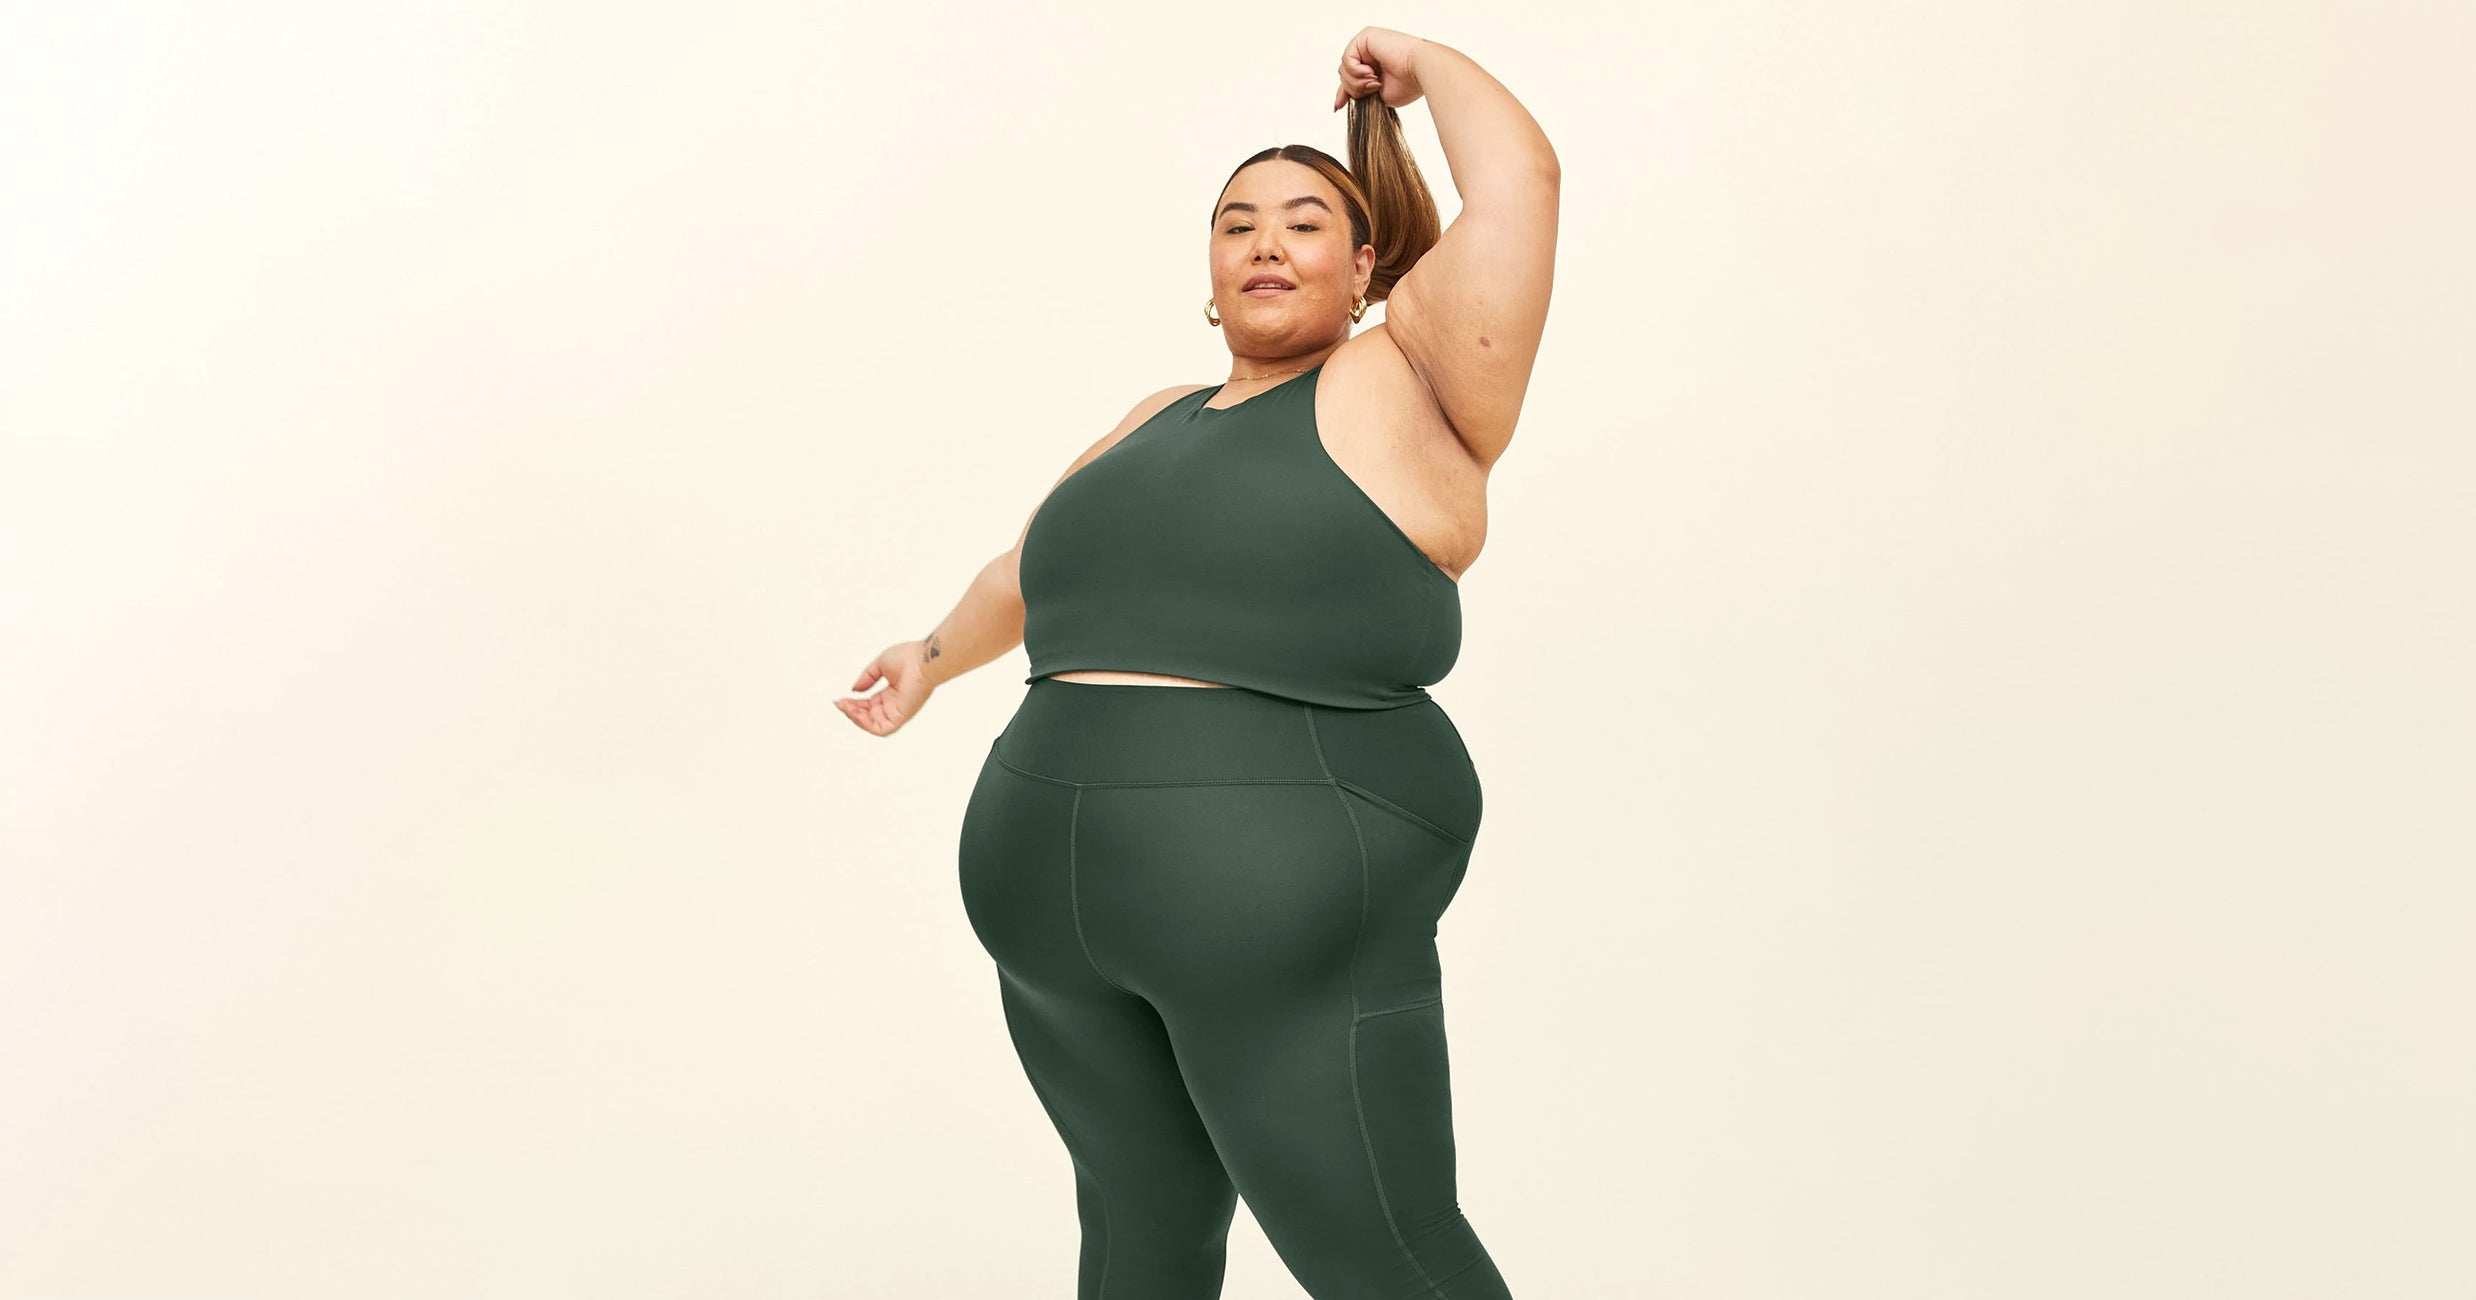 Meet 5 'Plus-Size' Models Who Should Have Beauty Contracts